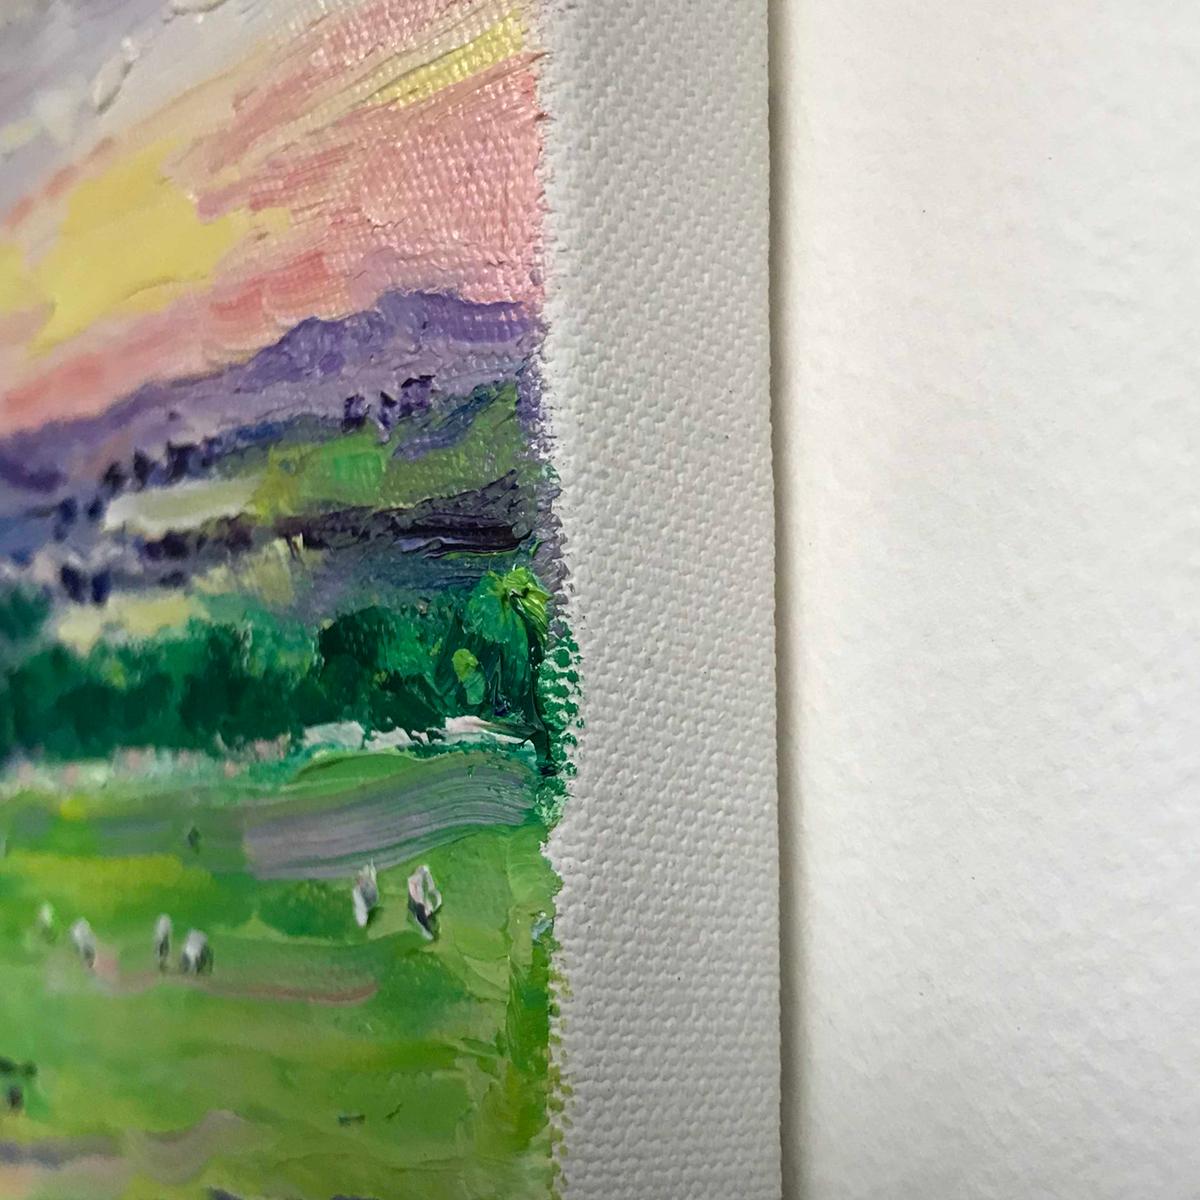 otswold Sheep is an Original Painting by Eleanor Woolley. Painted Plein Air and finished in the Artist's Gloucestershire Studio, this Painting depicts some sheep grazing in the Cotswolds. The sun is setting, and the dusky sky of pinks and yellows is